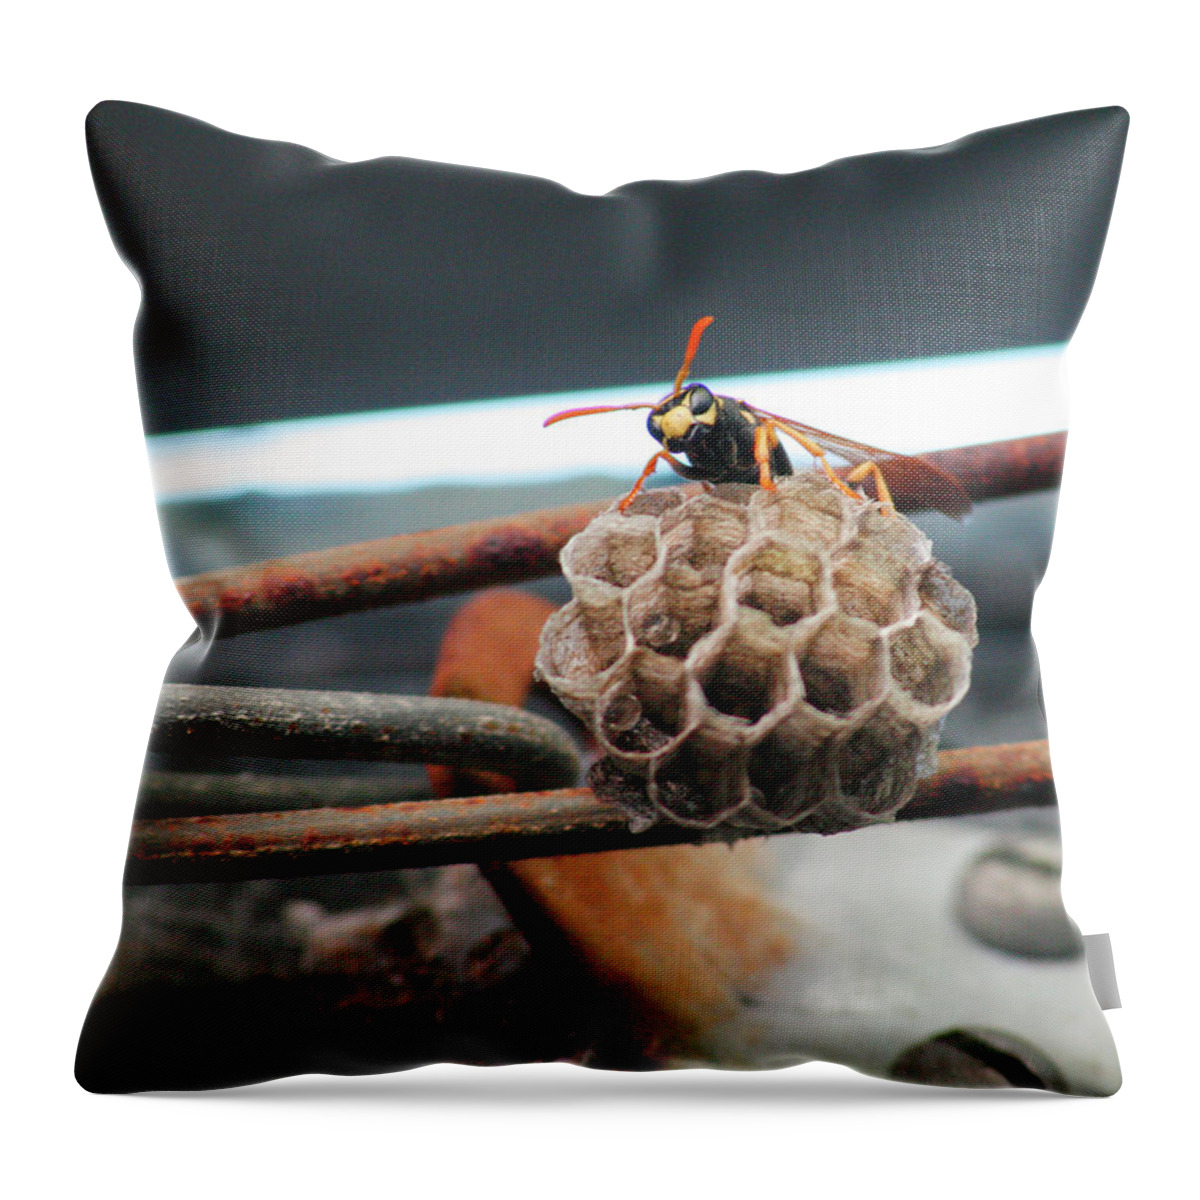 Insect Throw Pillow featuring the photograph Peek-a-boo by Jim Feldman